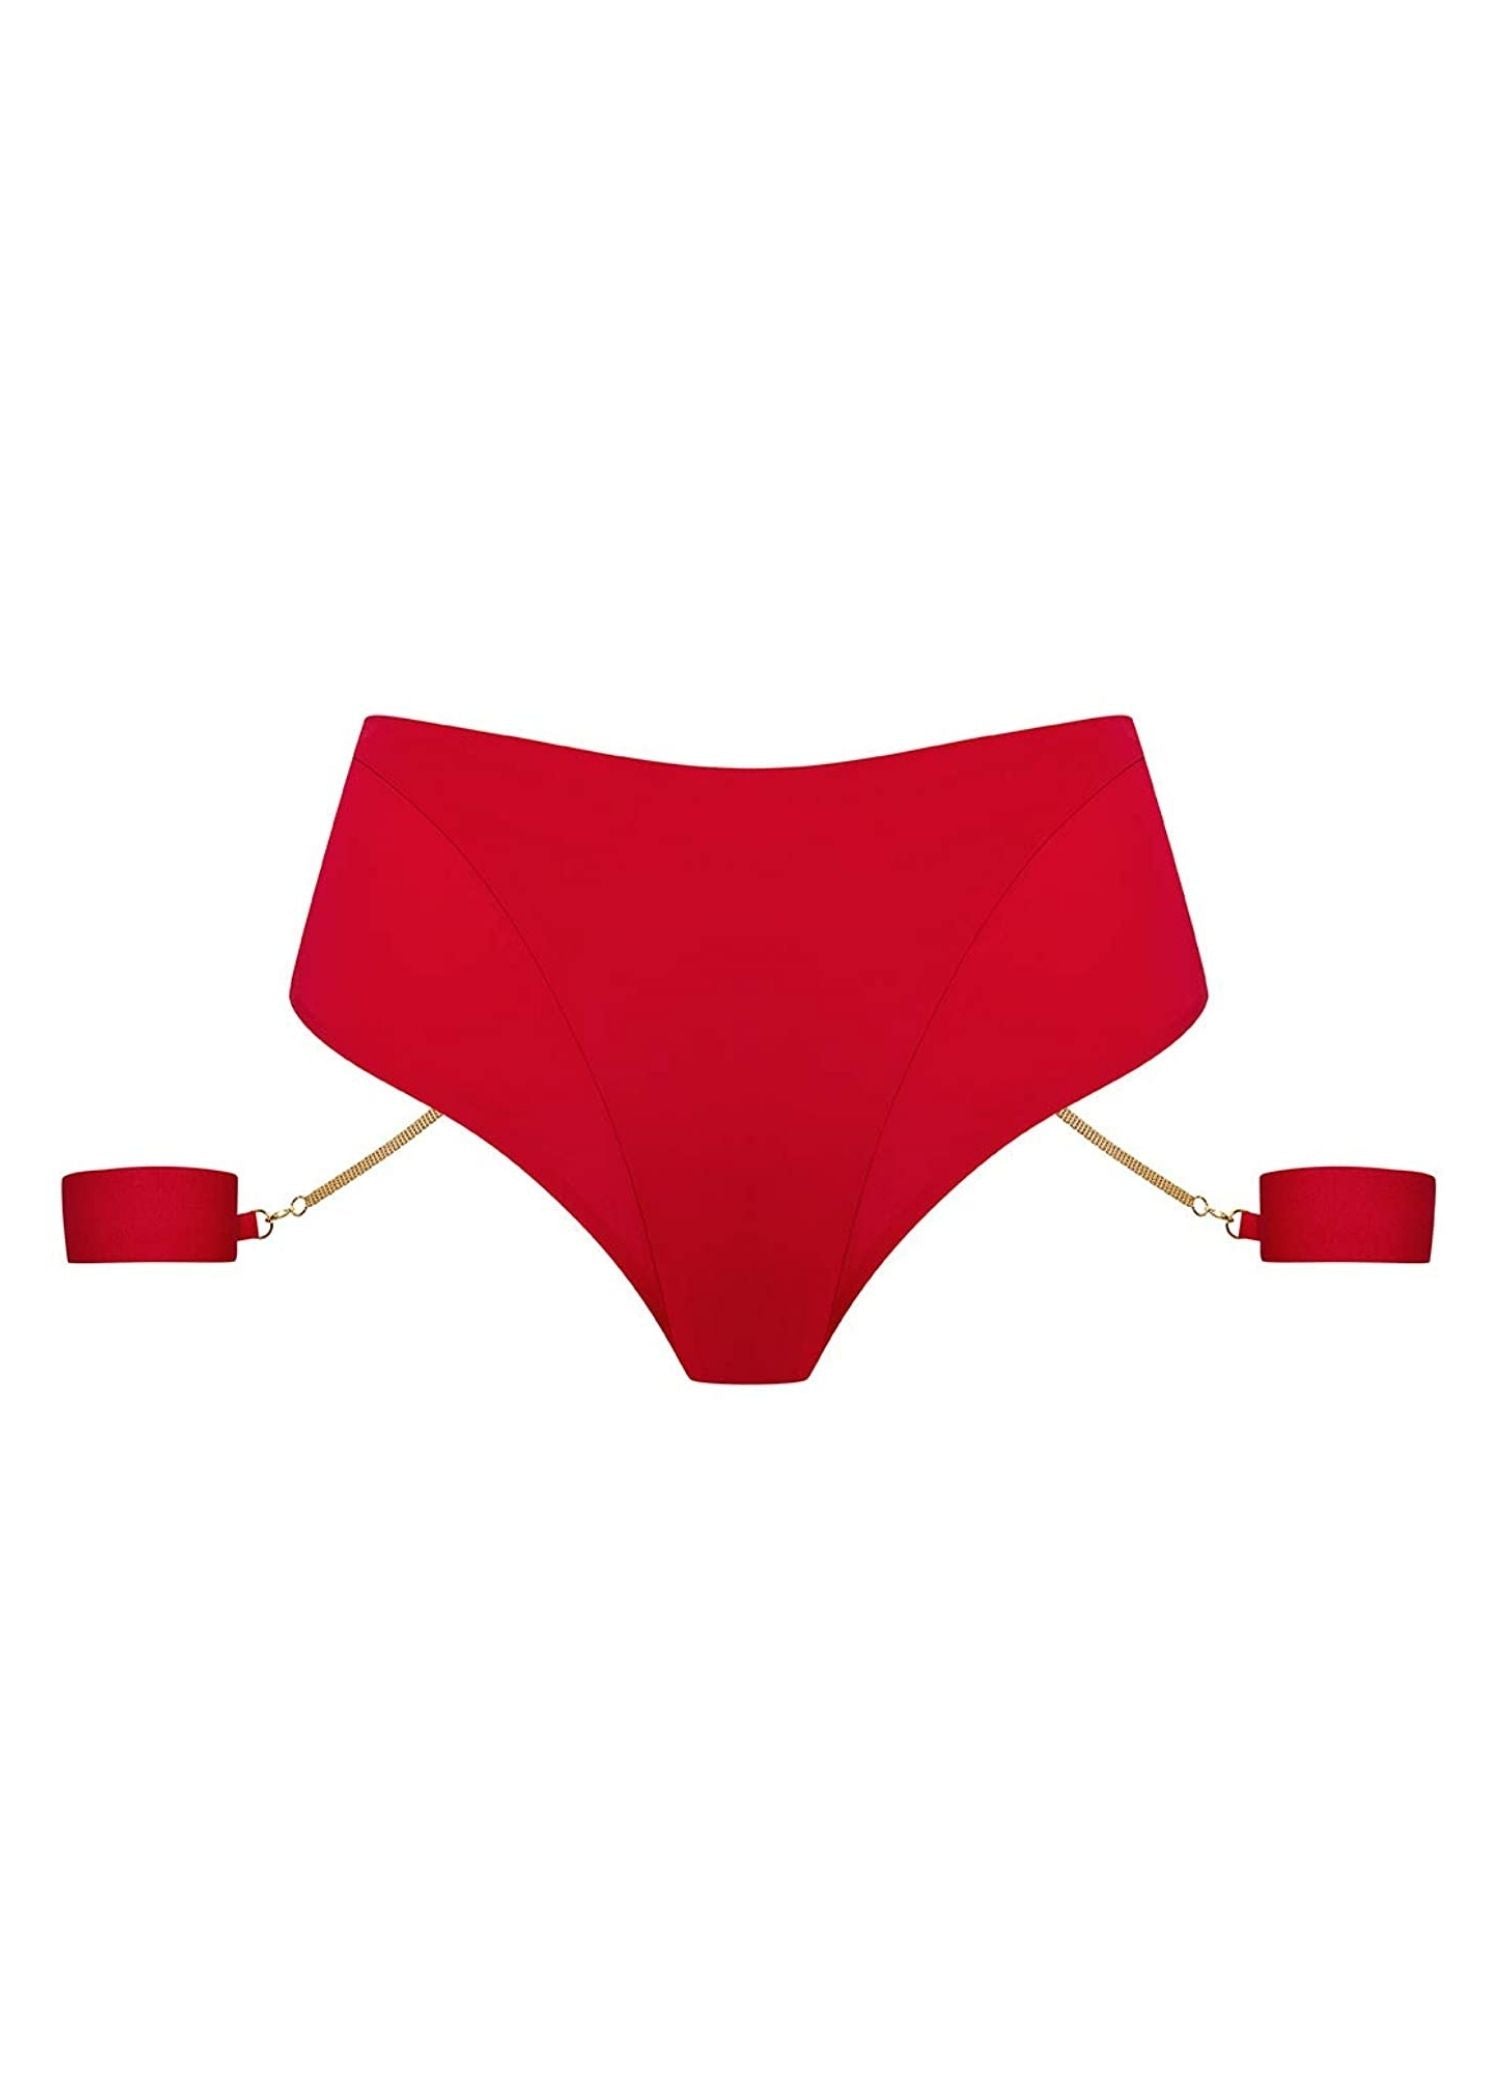 Maison Close Tapage Nocturne Red Open High Waist Thong – Avec Amour Lingerie